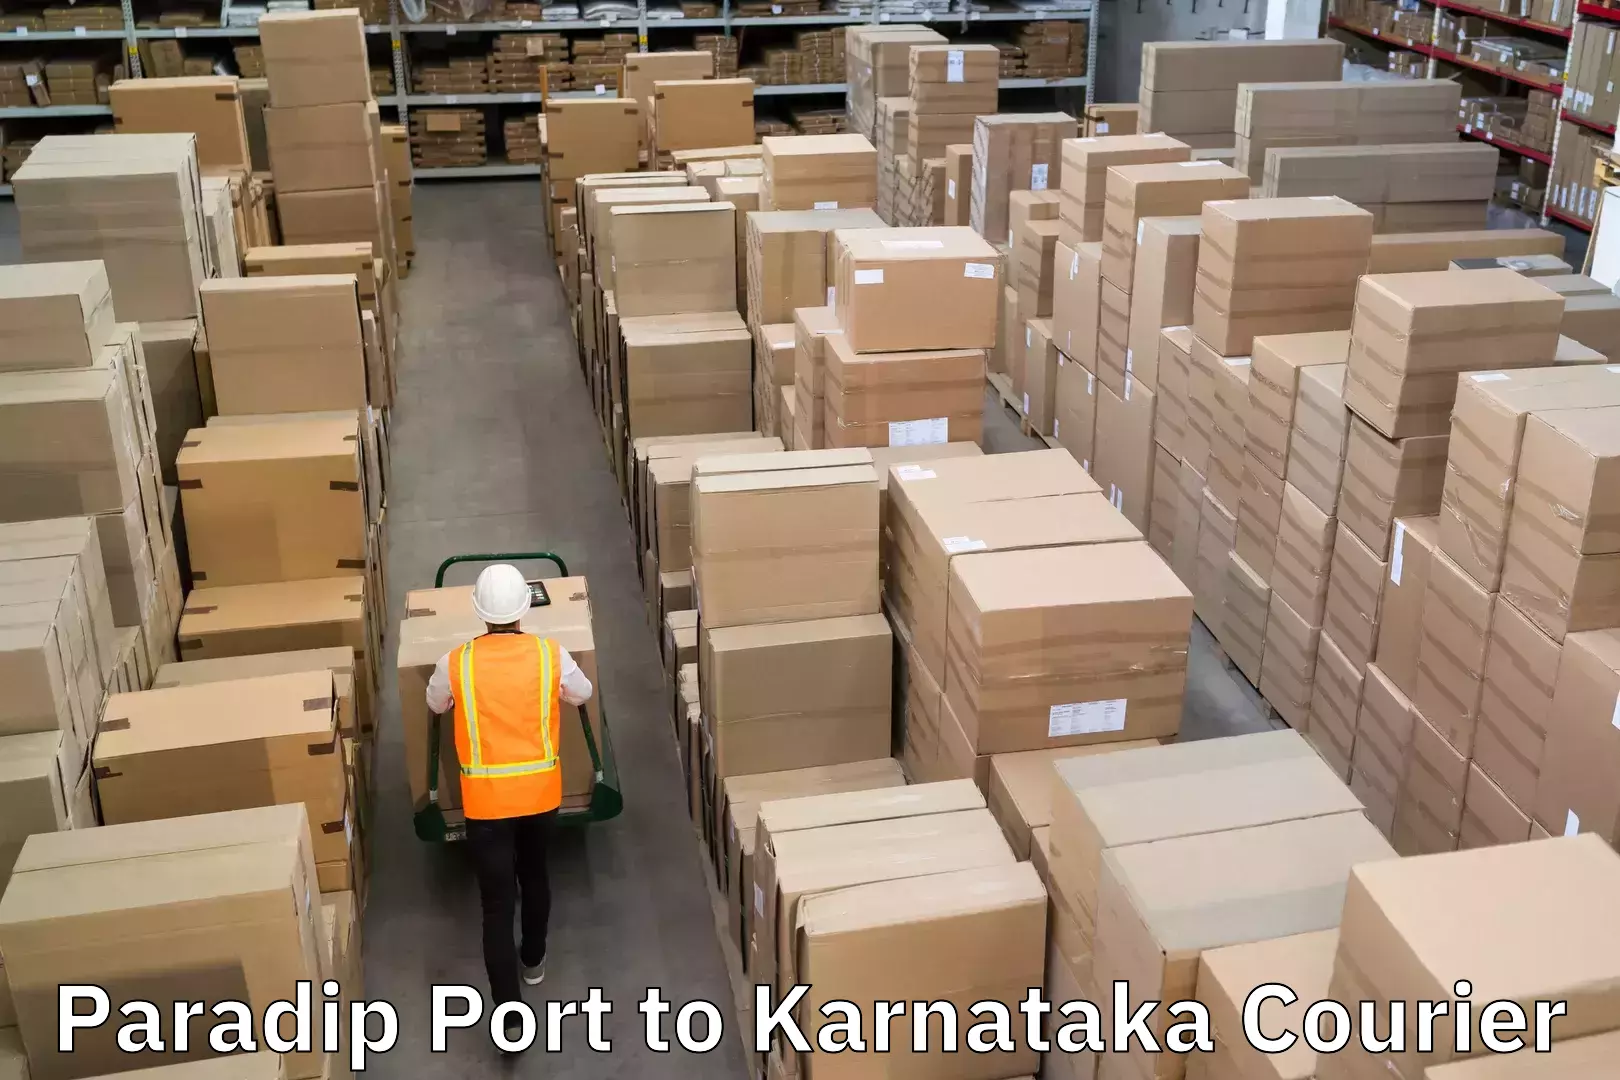 On-time delivery services Paradip Port to Karnataka